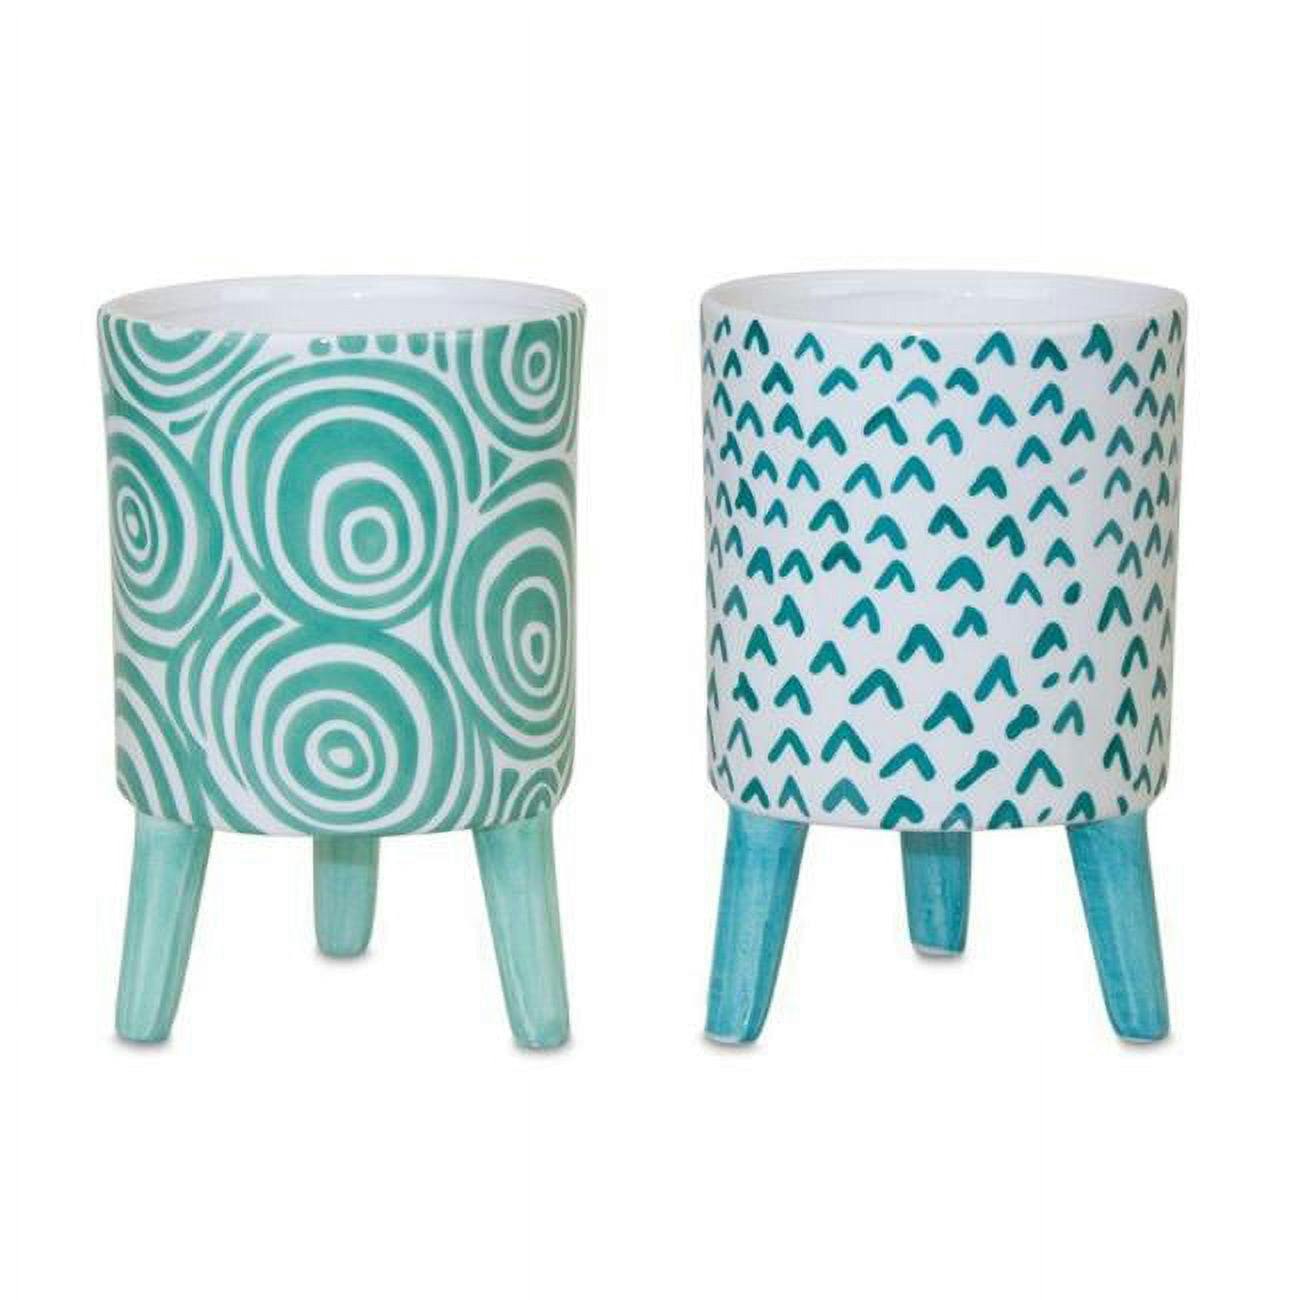 Teal & White Abstract Pattern Dolomite Mini Pot with Legs, Set of 6